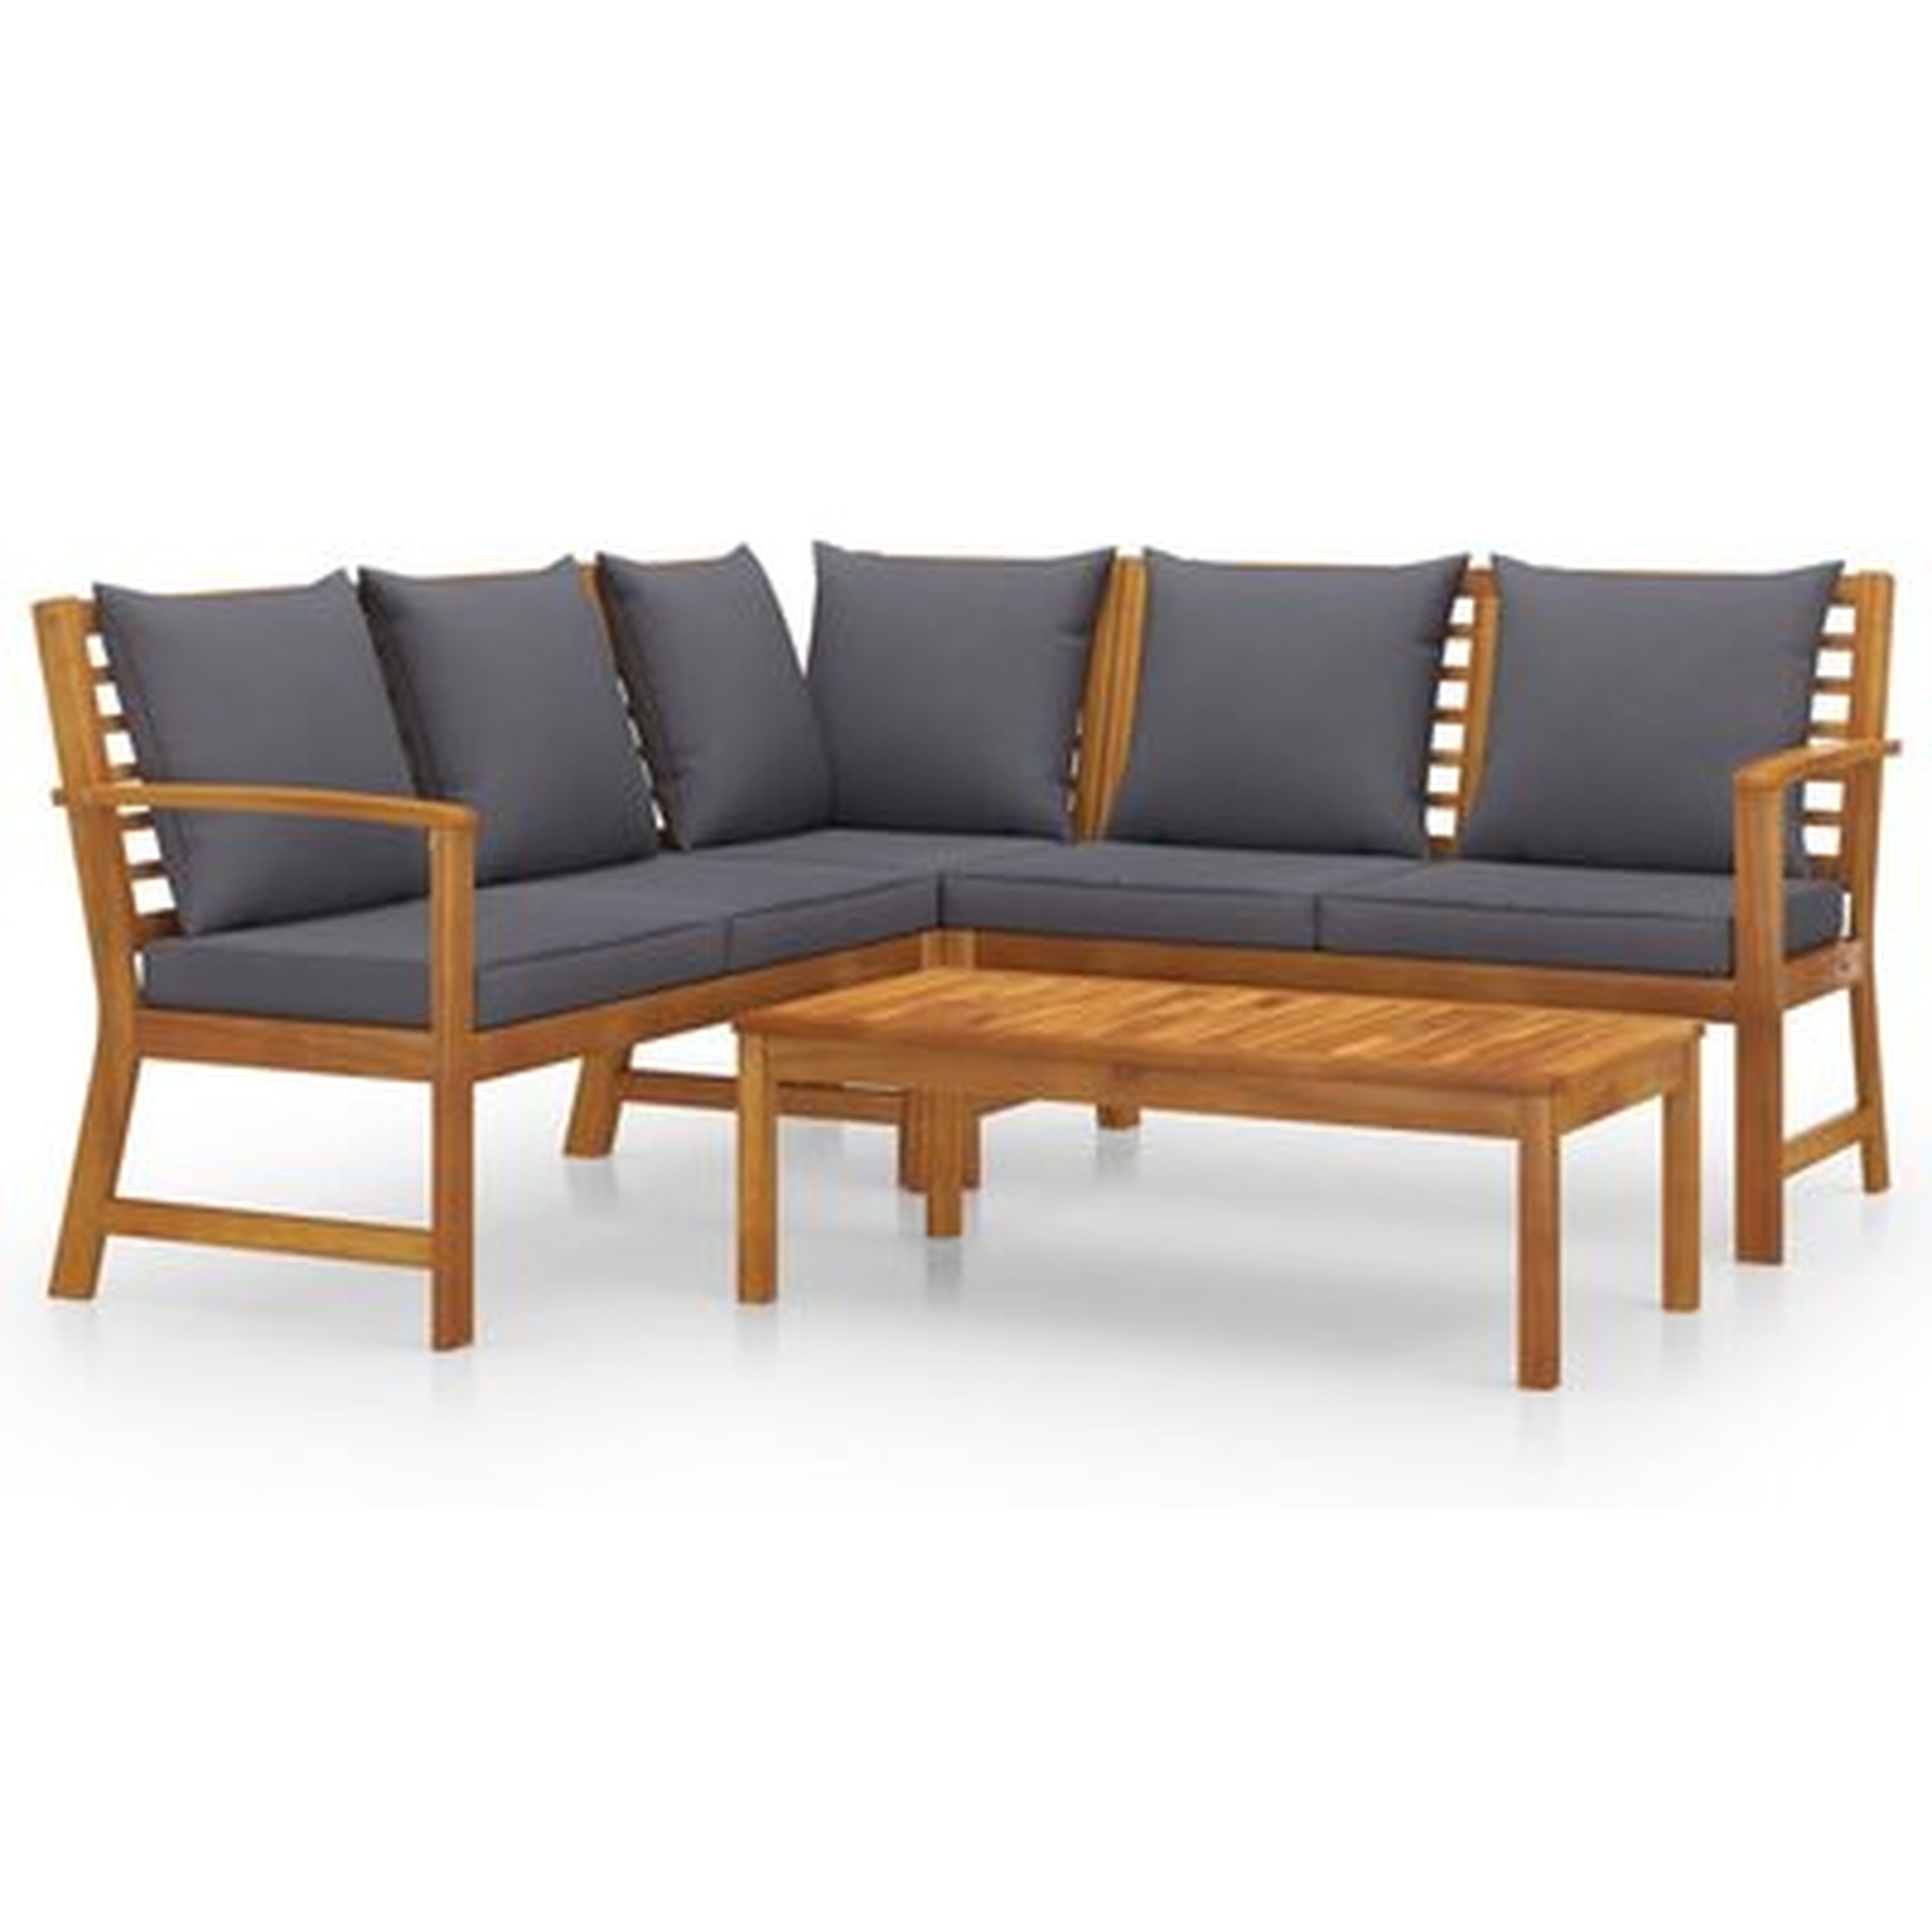 Rebecca-May Solid Wood 5 - Person Seating Group with Cushions - Wayfair